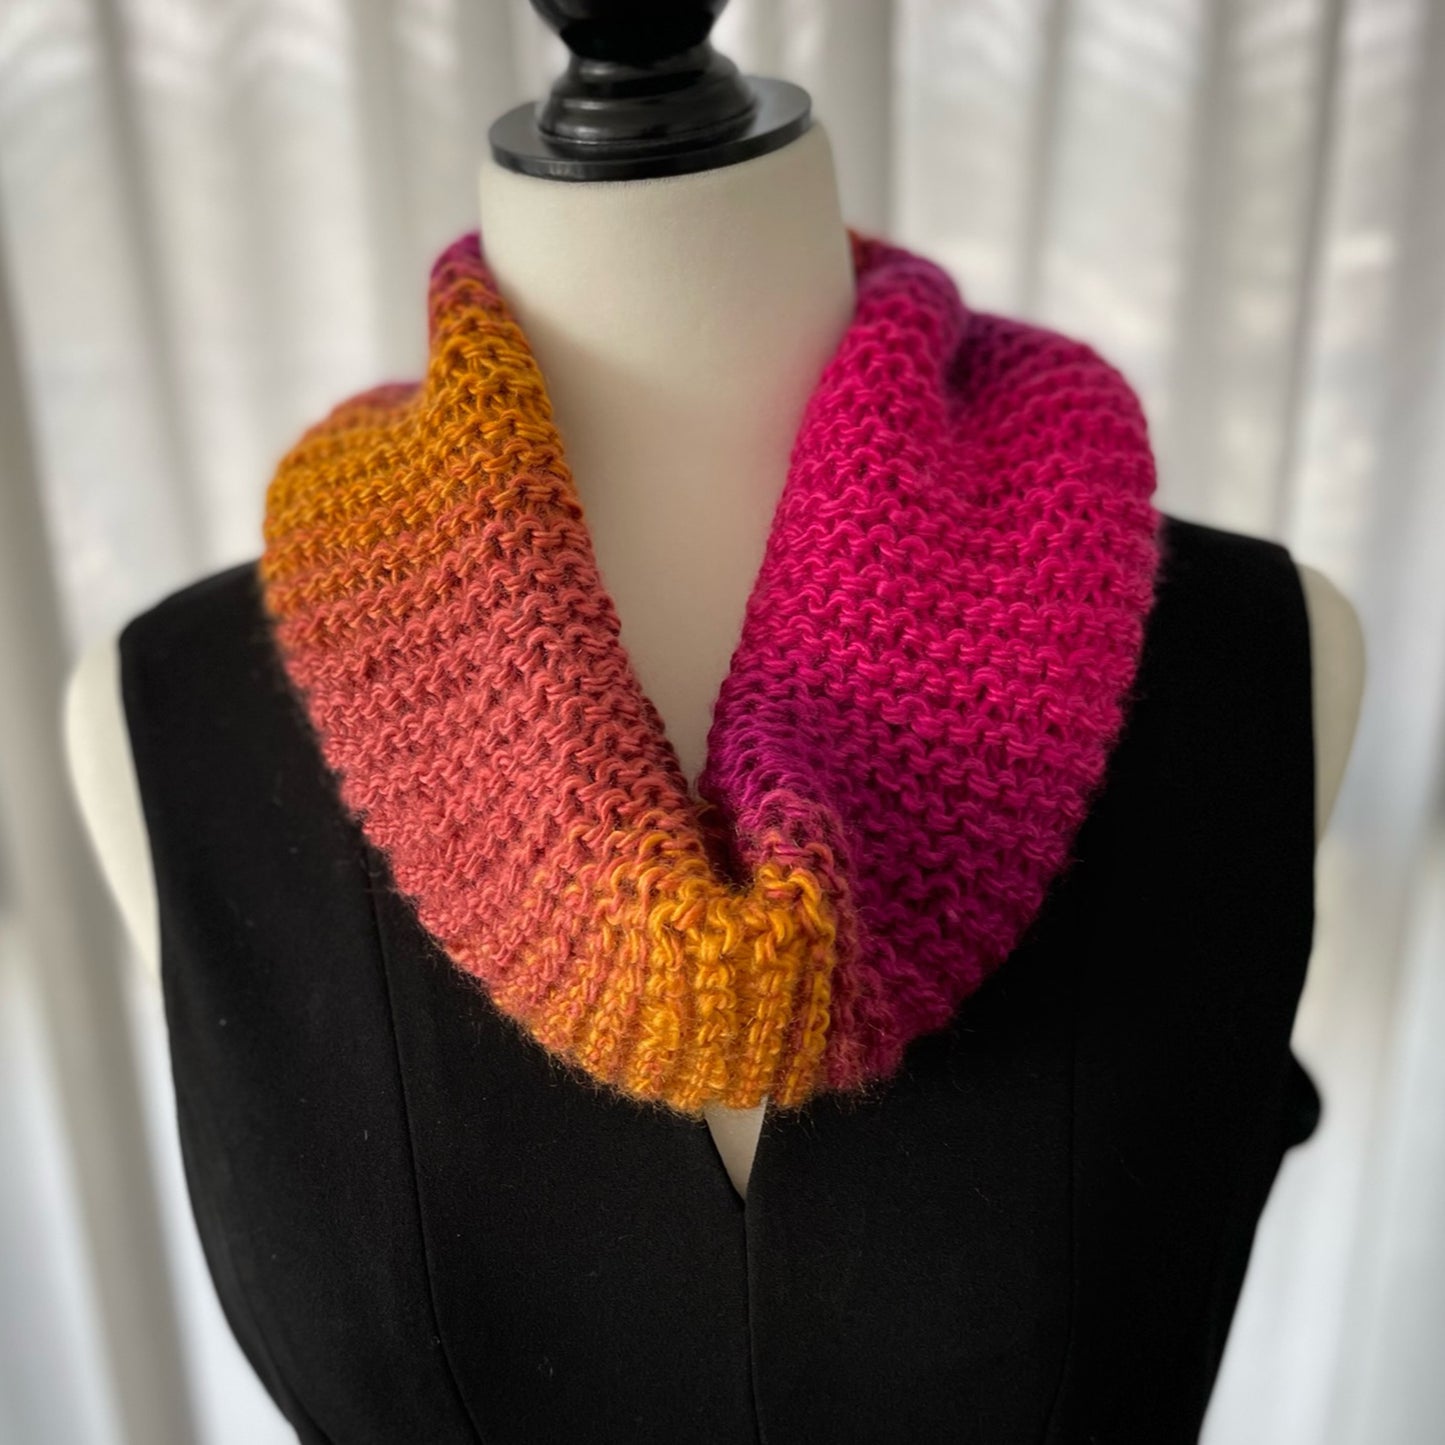 Hand knitted Cowl